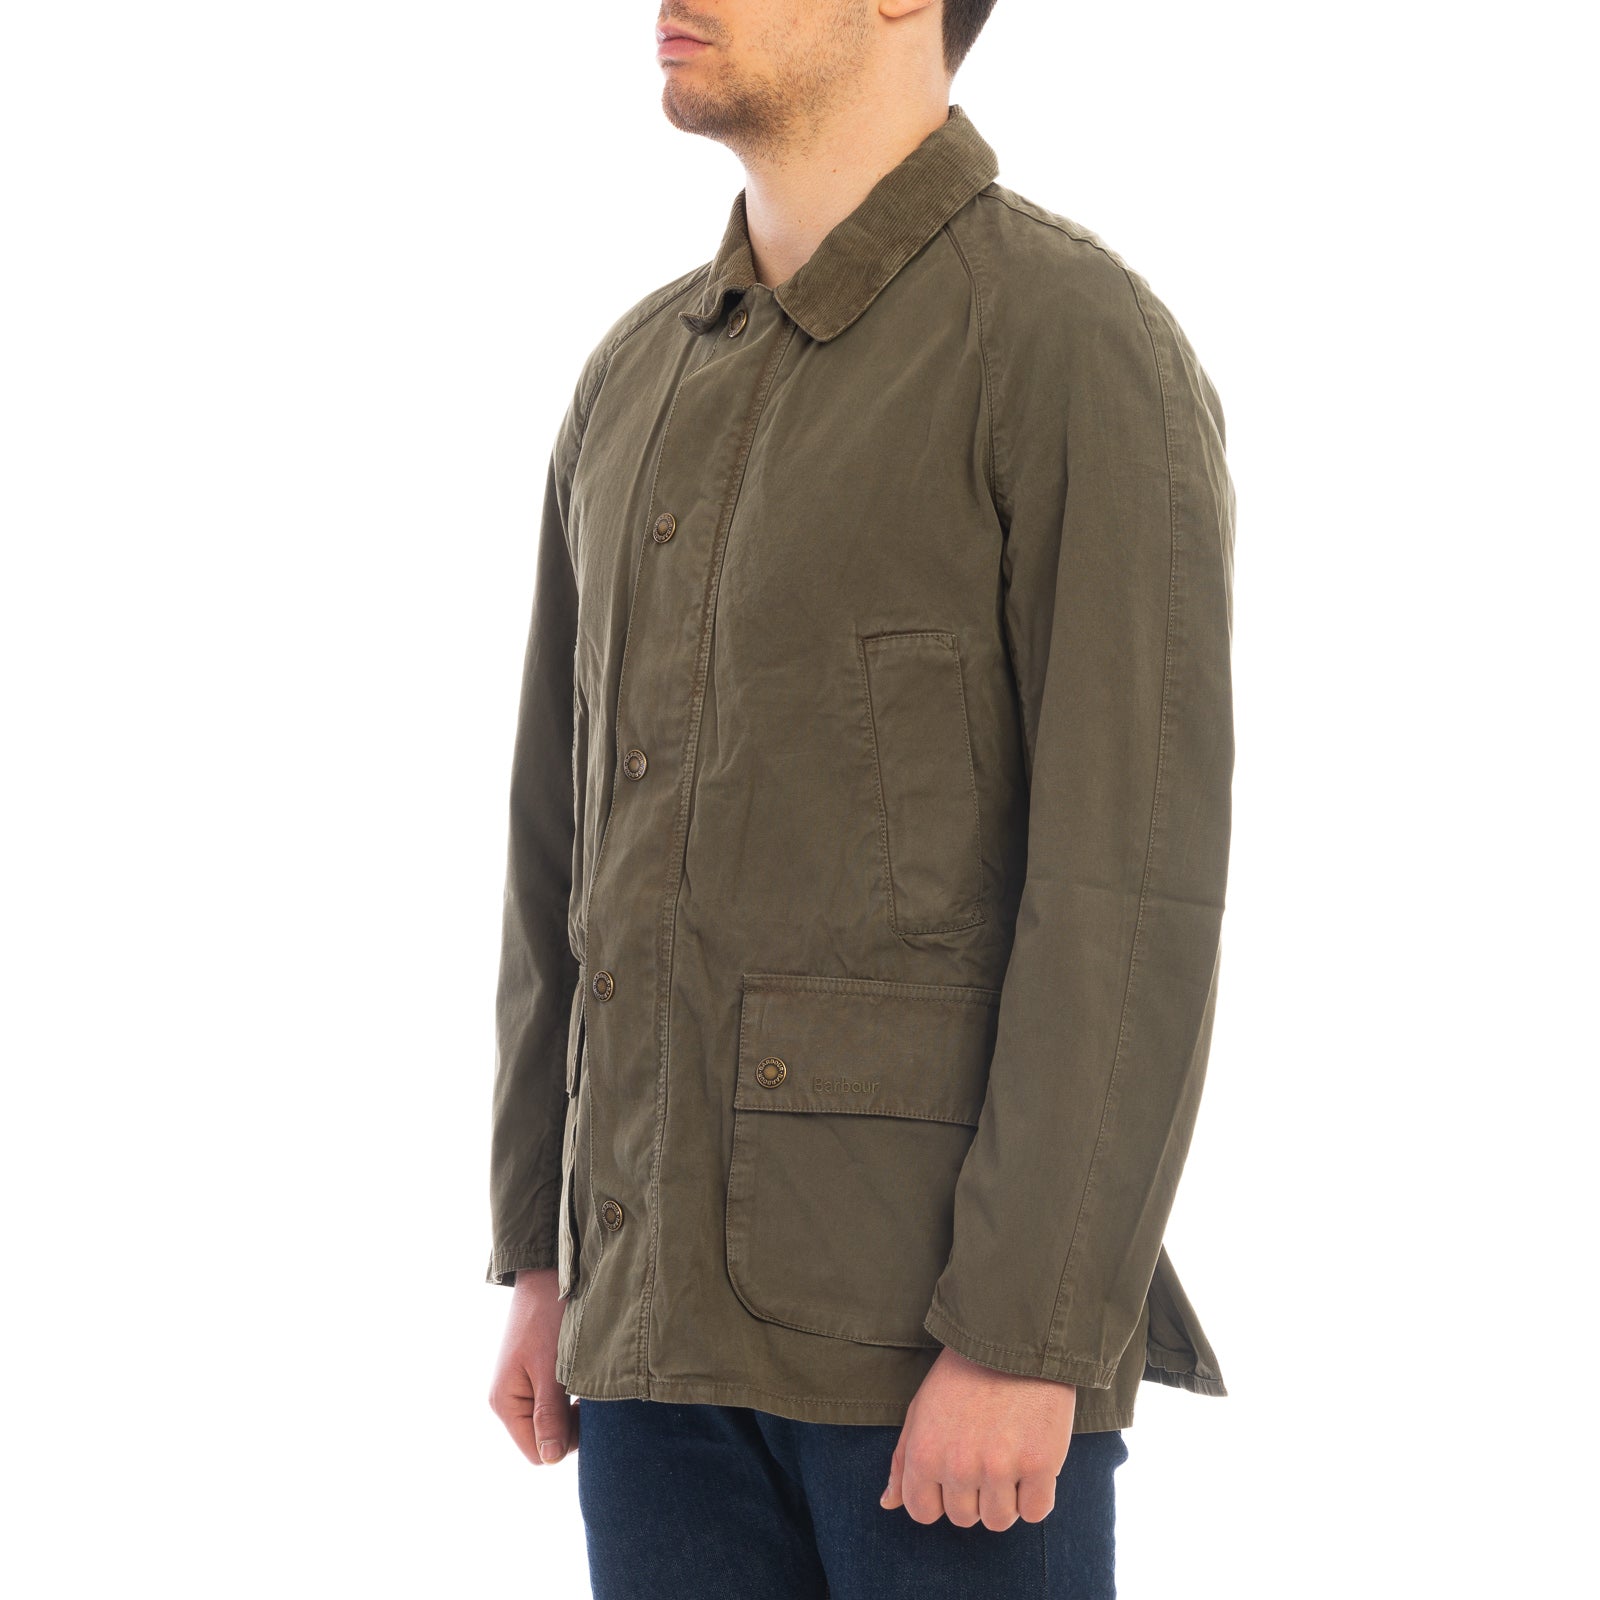 Giubbotto BARBOUR Ashby
Olive